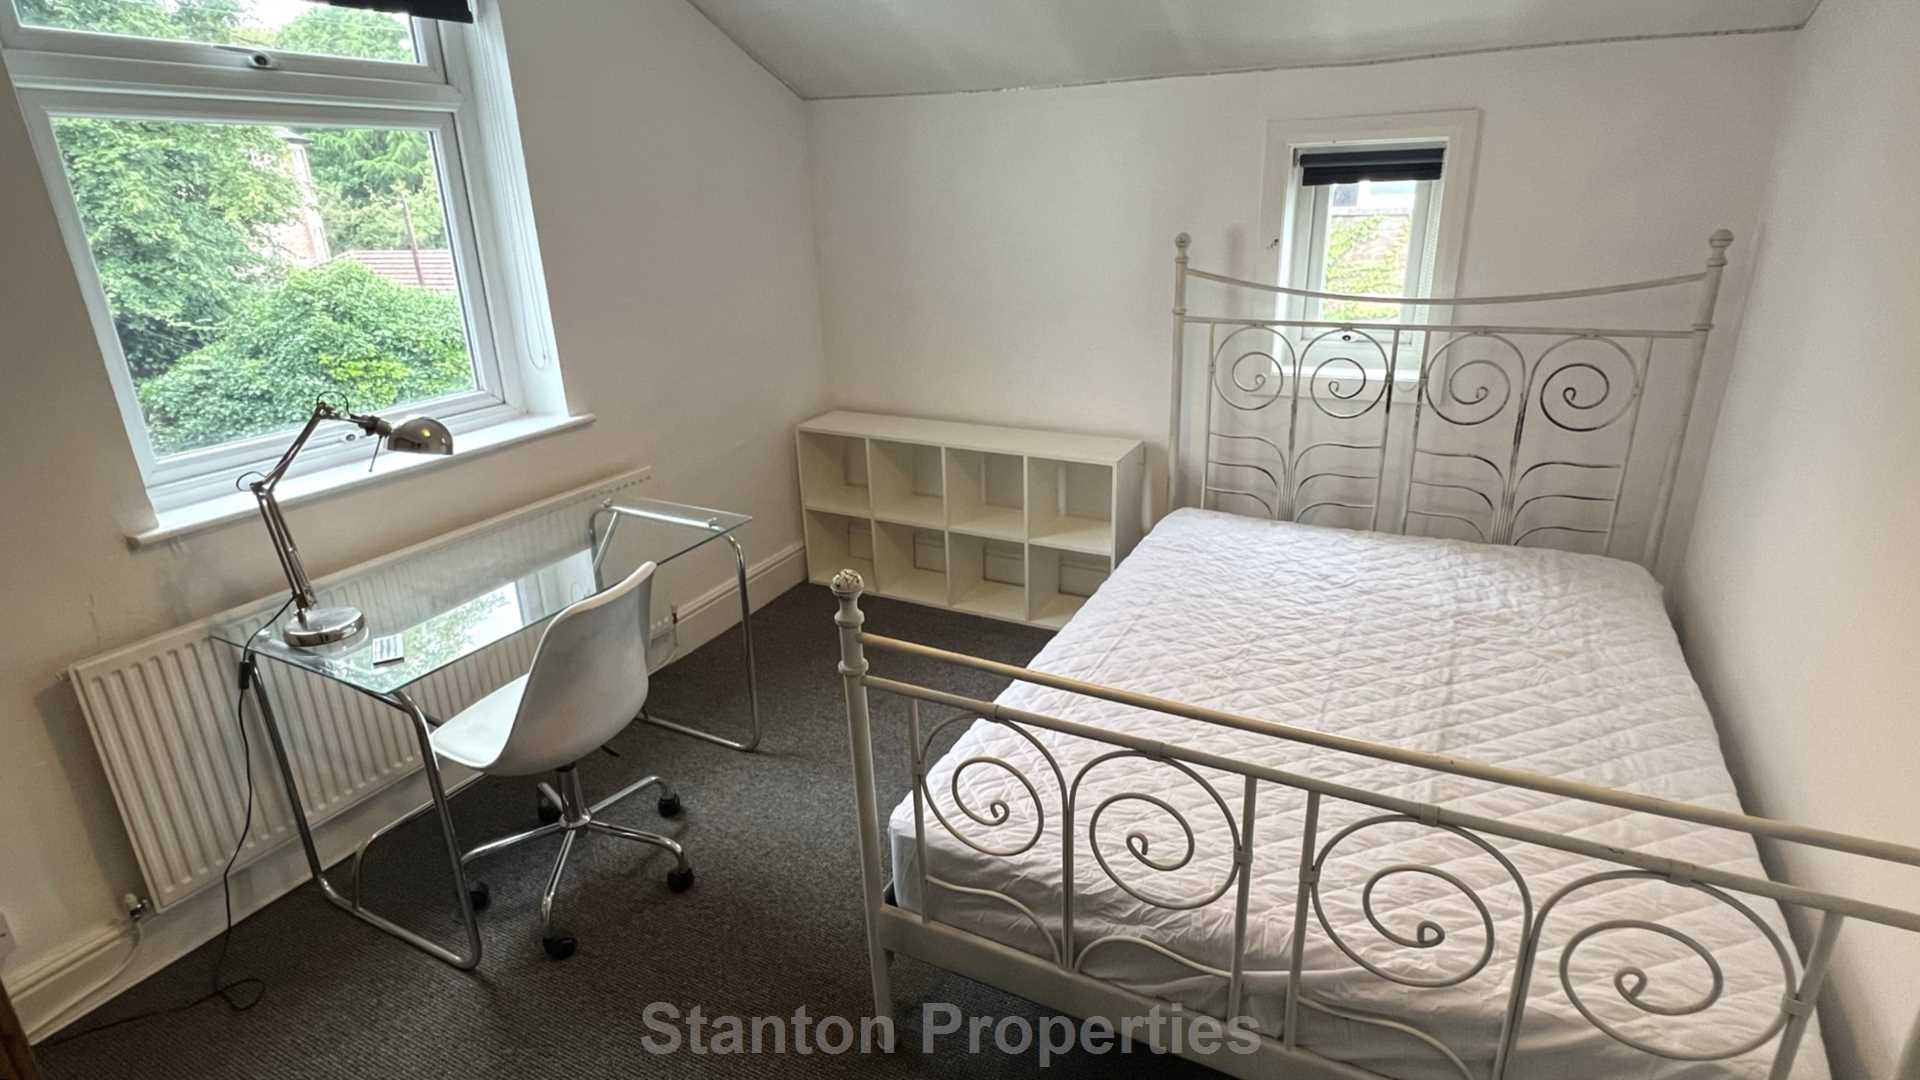 £150 PER WEEK / £650 PER MONTH, Lombard Grove, Manchester, Image 13